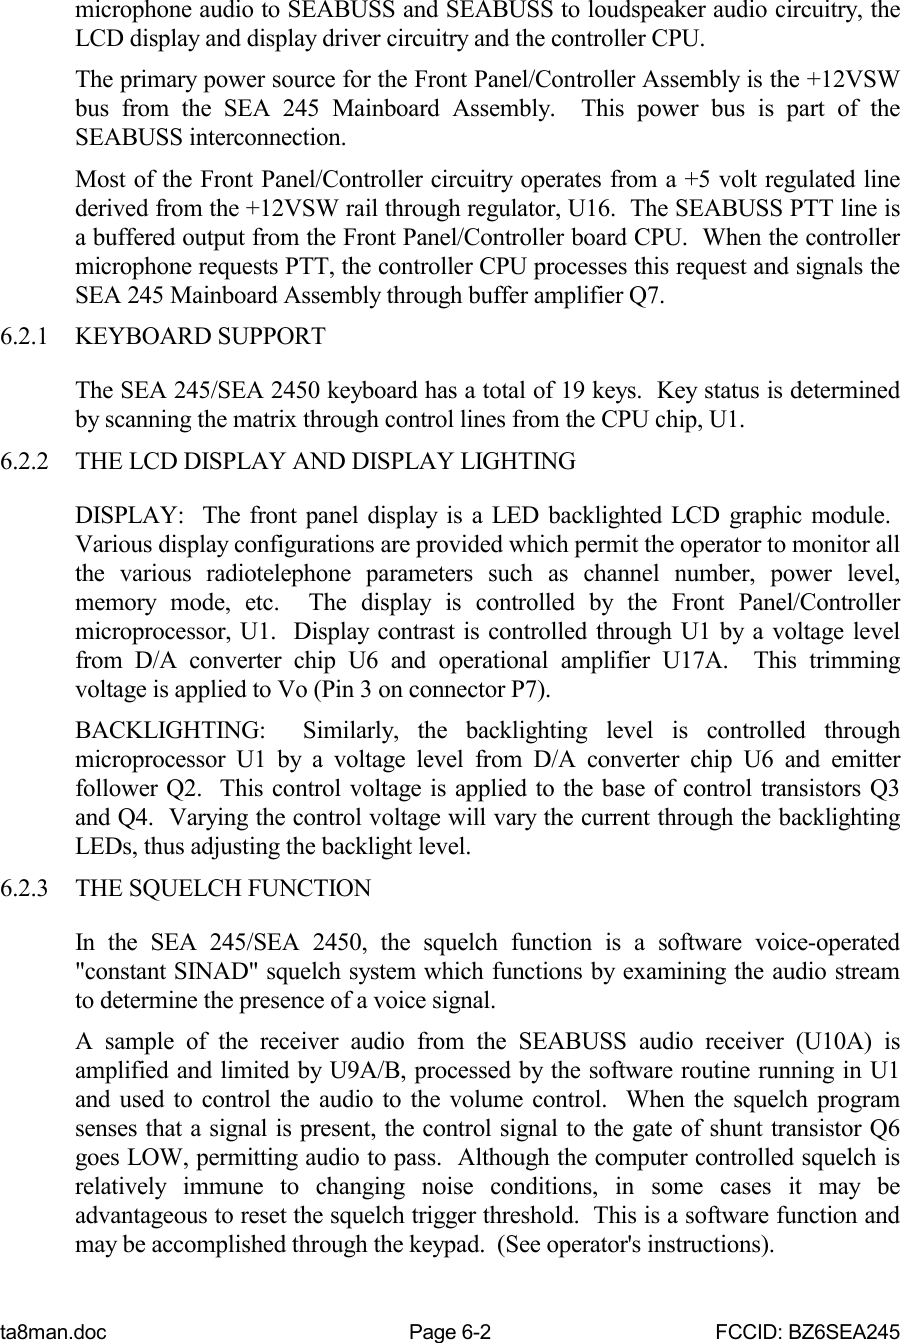 ta8man.doc Page 6-2 FCCID: BZ6SEA245microphone audio to SEABUSS and SEABUSS to loudspeaker audio circuitry, theLCD display and display driver circuitry and the controller CPU.The primary power source for the Front Panel/Controller Assembly is the +12VSWbus from the SEA 245 Mainboard Assembly.  This power bus is part of theSEABUSS interconnection.Most of the Front Panel/Controller circuitry operates from a +5 volt regulated linederived from the +12VSW rail through regulator, U16.  The SEABUSS PTT line isa buffered output from the Front Panel/Controller board CPU.  When the controllermicrophone requests PTT, the controller CPU processes this request and signals theSEA 245 Mainboard Assembly through buffer amplifier Q7.6.2.1 KEYBOARD SUPPORTThe SEA 245/SEA 2450 keyboard has a total of 19 keys.  Key status is determinedby scanning the matrix through control lines from the CPU chip, U1.6.2.2 THE LCD DISPLAY AND DISPLAY LIGHTINGDISPLAY:  The front panel display is a LED backlighted LCD graphic module. Various display configurations are provided which permit the operator to monitor allthe various radiotelephone parameters such as channel number, power level,memory mode, etc.  The display is controlled by the Front Panel/Controllermicroprocessor, U1.  Display contrast is controlled through U1 by a voltage levelfrom D/A converter chip U6 and operational amplifier U17A.  This trimmingvoltage is applied to Vo (Pin 3 on connector P7).BACKLIGHTING:  Similarly, the backlighting level is controlled throughmicroprocessor U1 by a voltage level from D/A converter chip U6 and emitterfollower Q2.  This control voltage is applied to the base of control transistors Q3and Q4.  Varying the control voltage will vary the current through the backlightingLEDs, thus adjusting the backlight level.6.2.3 THE SQUELCH FUNCTIONIn the SEA 245/SEA 2450, the squelch function is a software voice-operated&quot;constant SINAD&quot; squelch system which functions by examining the audio streamto determine the presence of a voice signal.A sample of the receiver audio from the SEABUSS audio receiver (U10A) isamplified and limited by U9A/B, processed by the software routine running in U1and used to control the audio to the volume control.  When the squelch programsenses that a signal is present, the control signal to the gate of shunt transistor Q6goes LOW, permitting audio to pass.  Although the computer controlled squelch isrelatively immune to changing noise conditions, in some cases it may beadvantageous to reset the squelch trigger threshold.  This is a software function andmay be accomplished through the keypad.  (See operator&apos;s instructions).